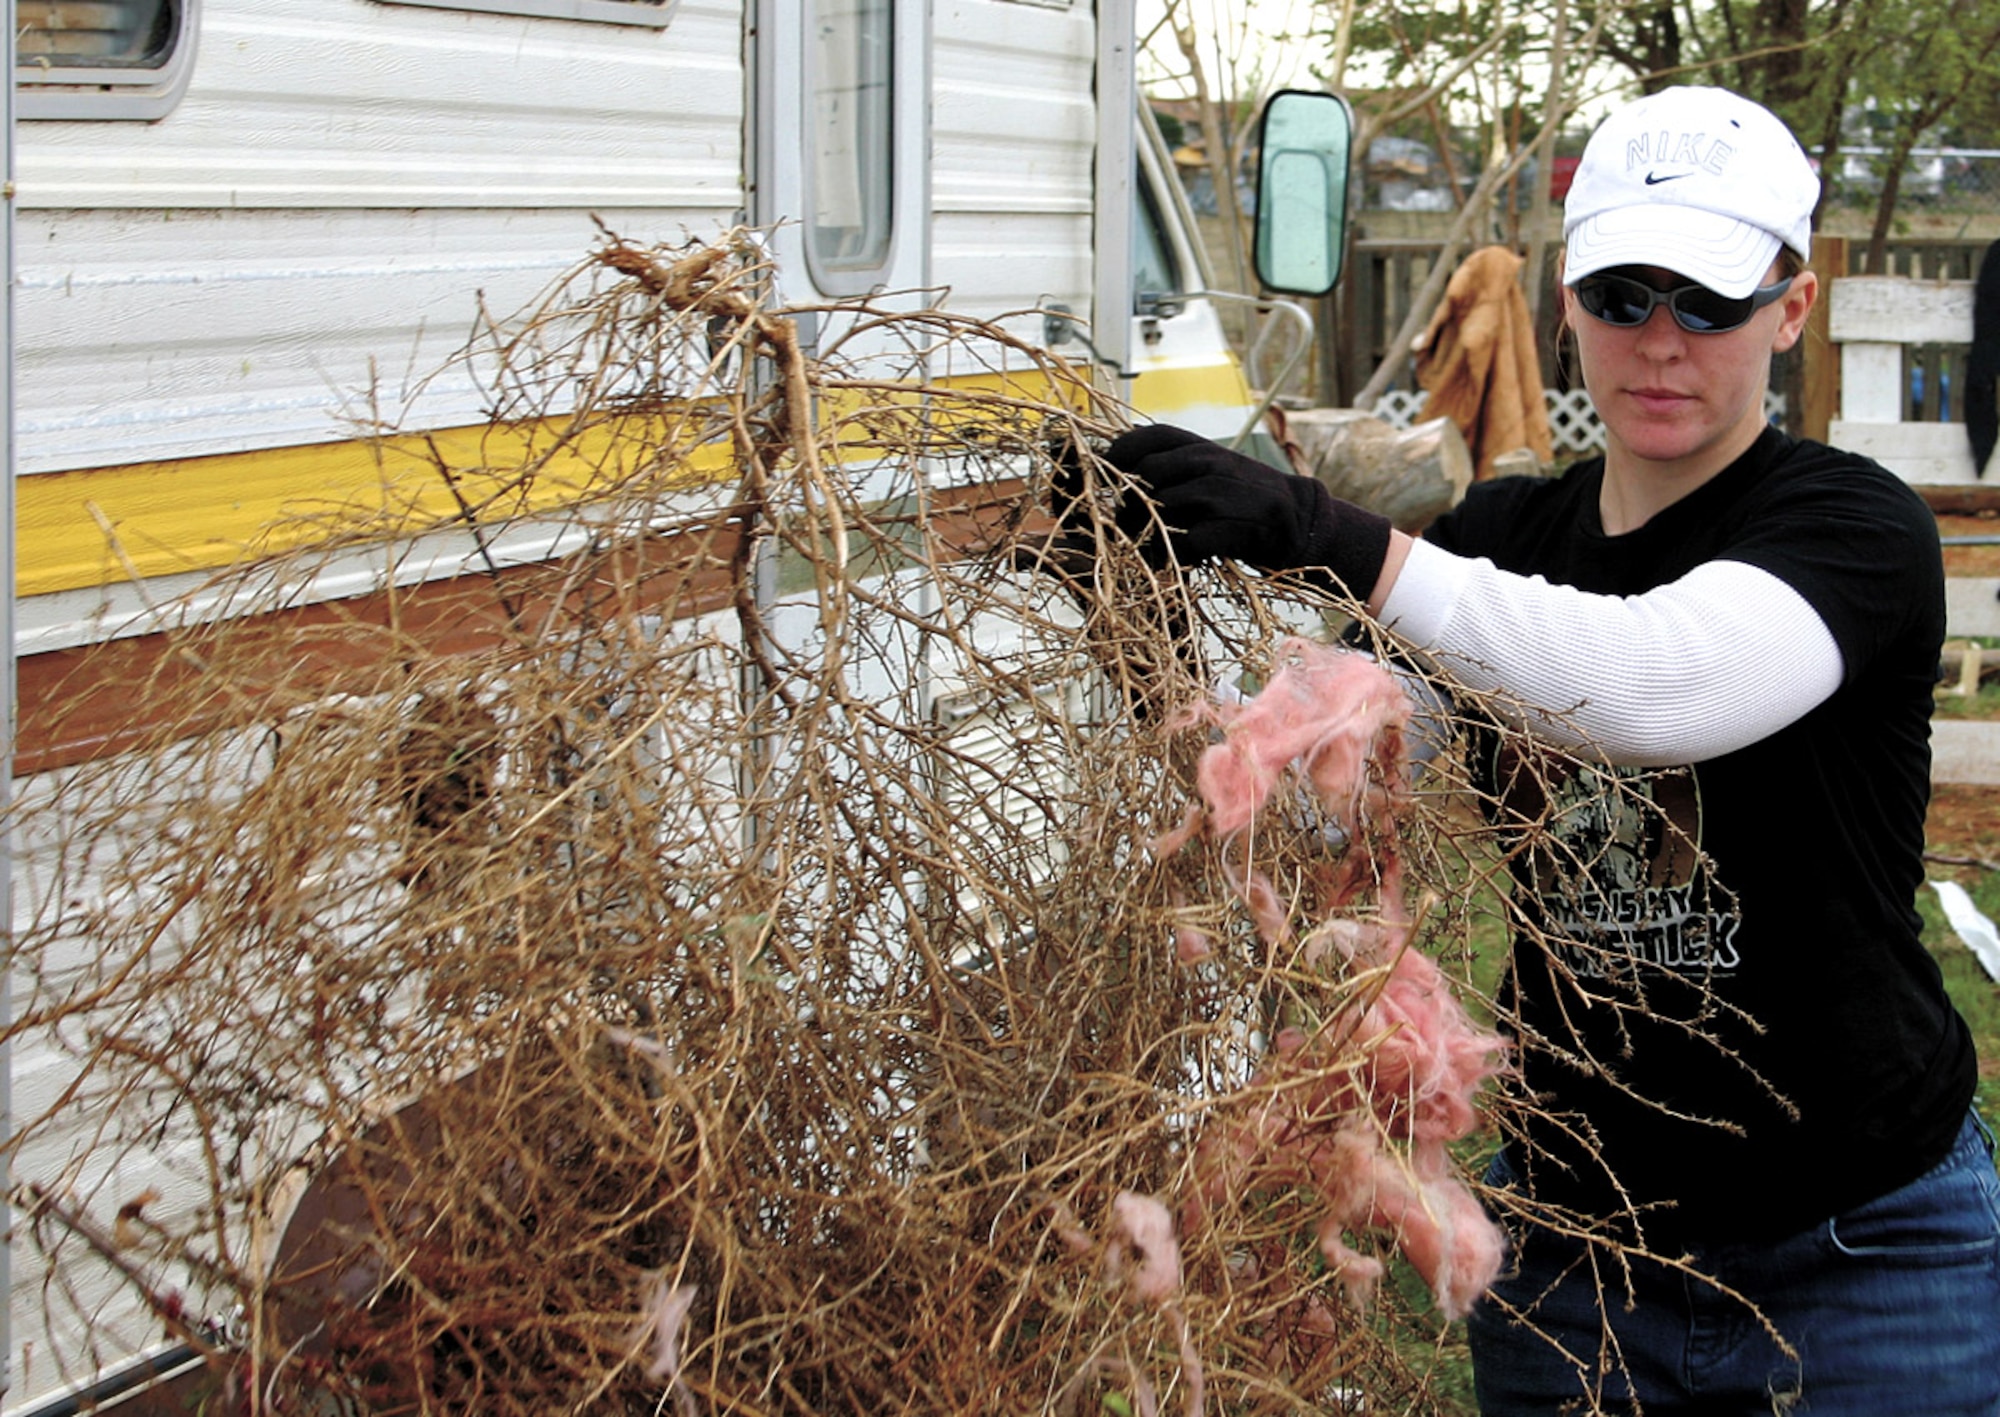 Senior Airman Christine O'Donnell clears out tumbleweeds during the clean up efforts March 25 in Clovis, N.M. More than 500 volunteers from Cannon Air Force Base began restoring the host city located six miles east of the base, after tornadoes ripped through the town March 23. Airman O'Donnell is assigned to the 27th Aircraft Maintenance Squadron. (U.S. Air Force photo/2nd Lt. George Tobias)